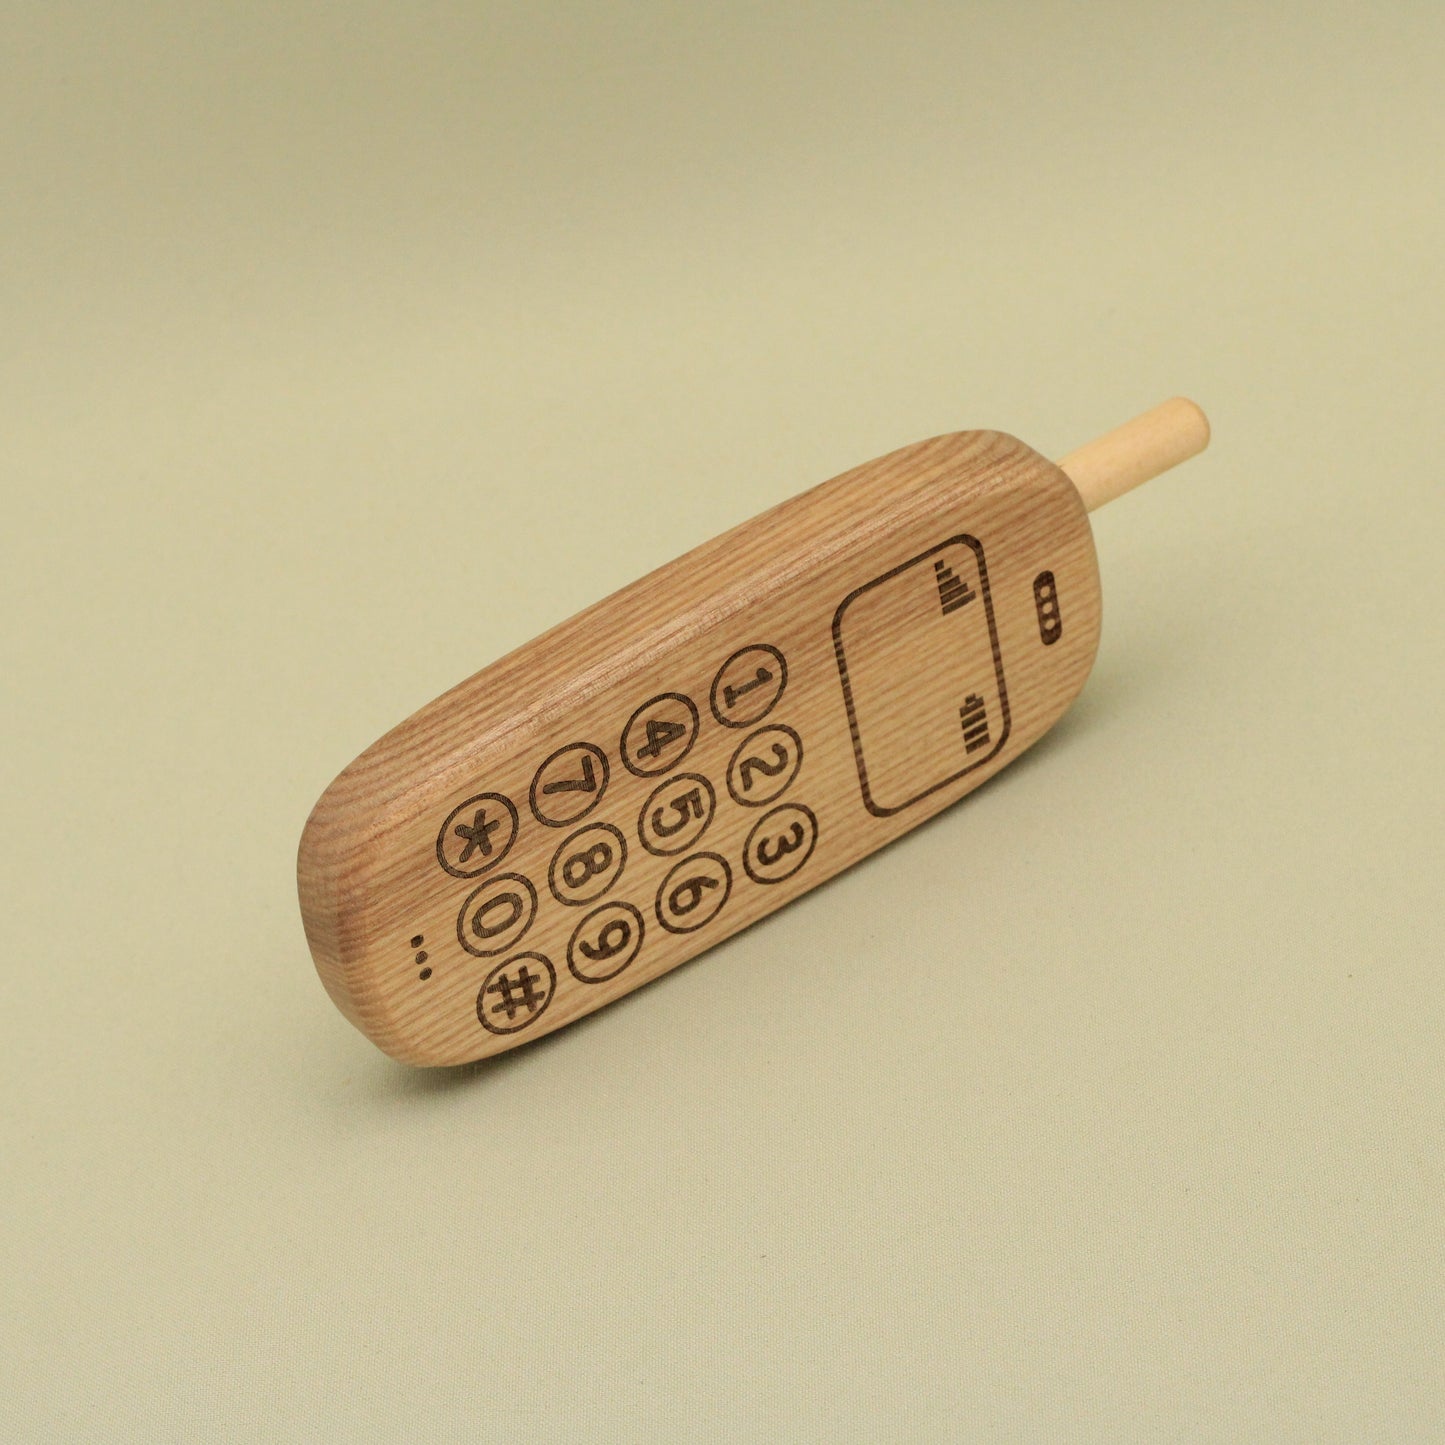 Lotes Toys Wooden Mobile Phone LE01